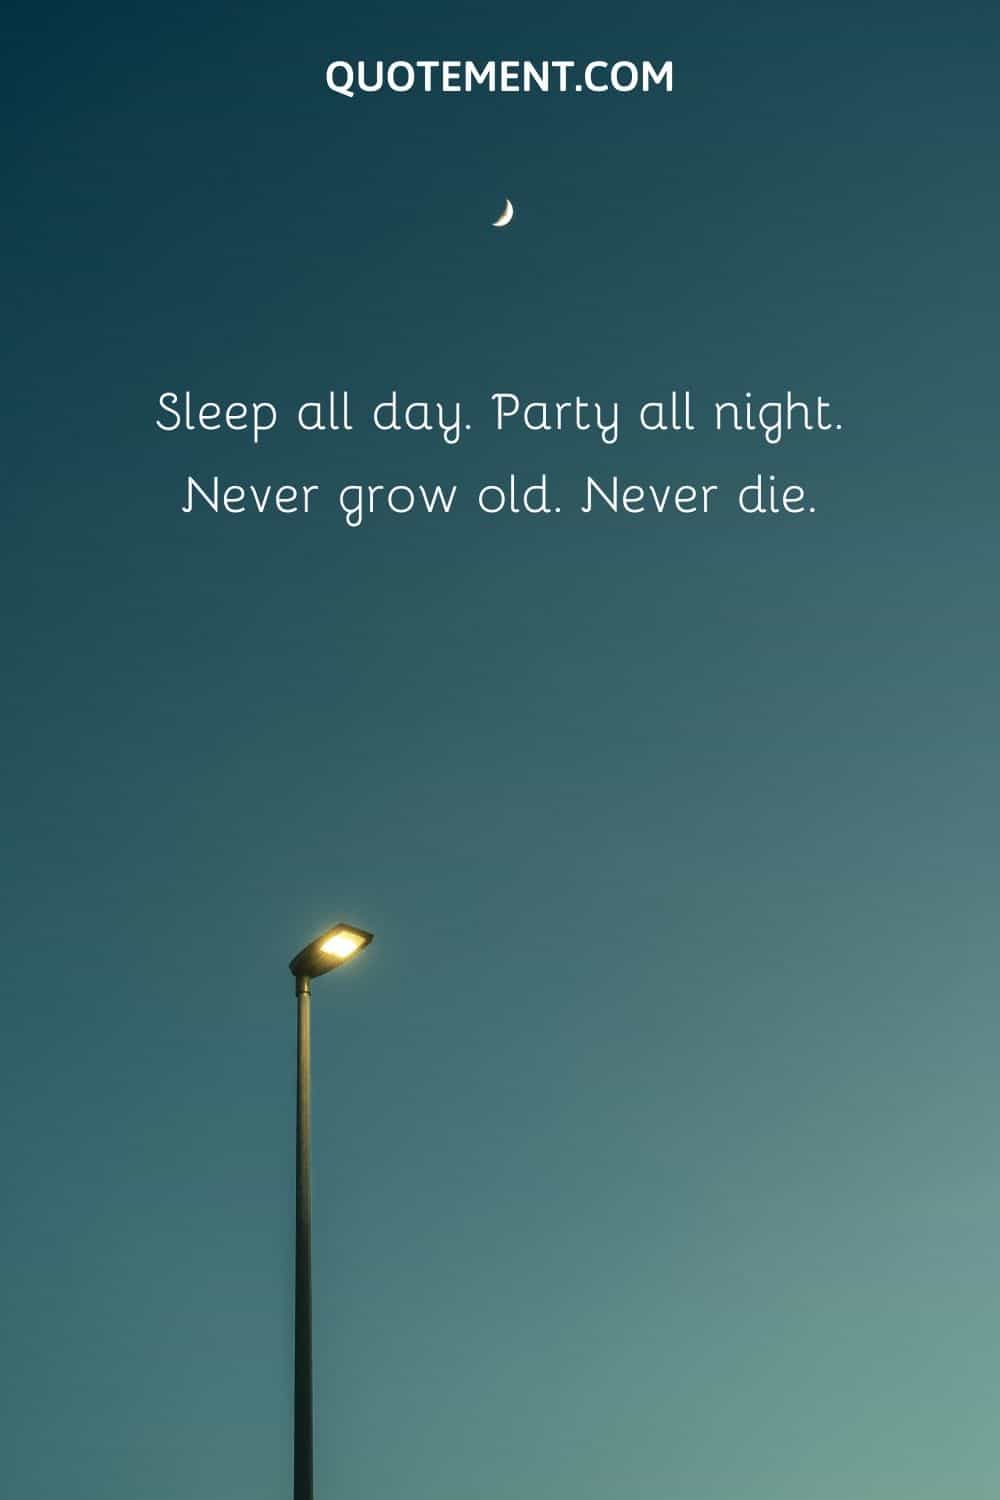 Sleep all day. Party all night. Never grow old. Never die